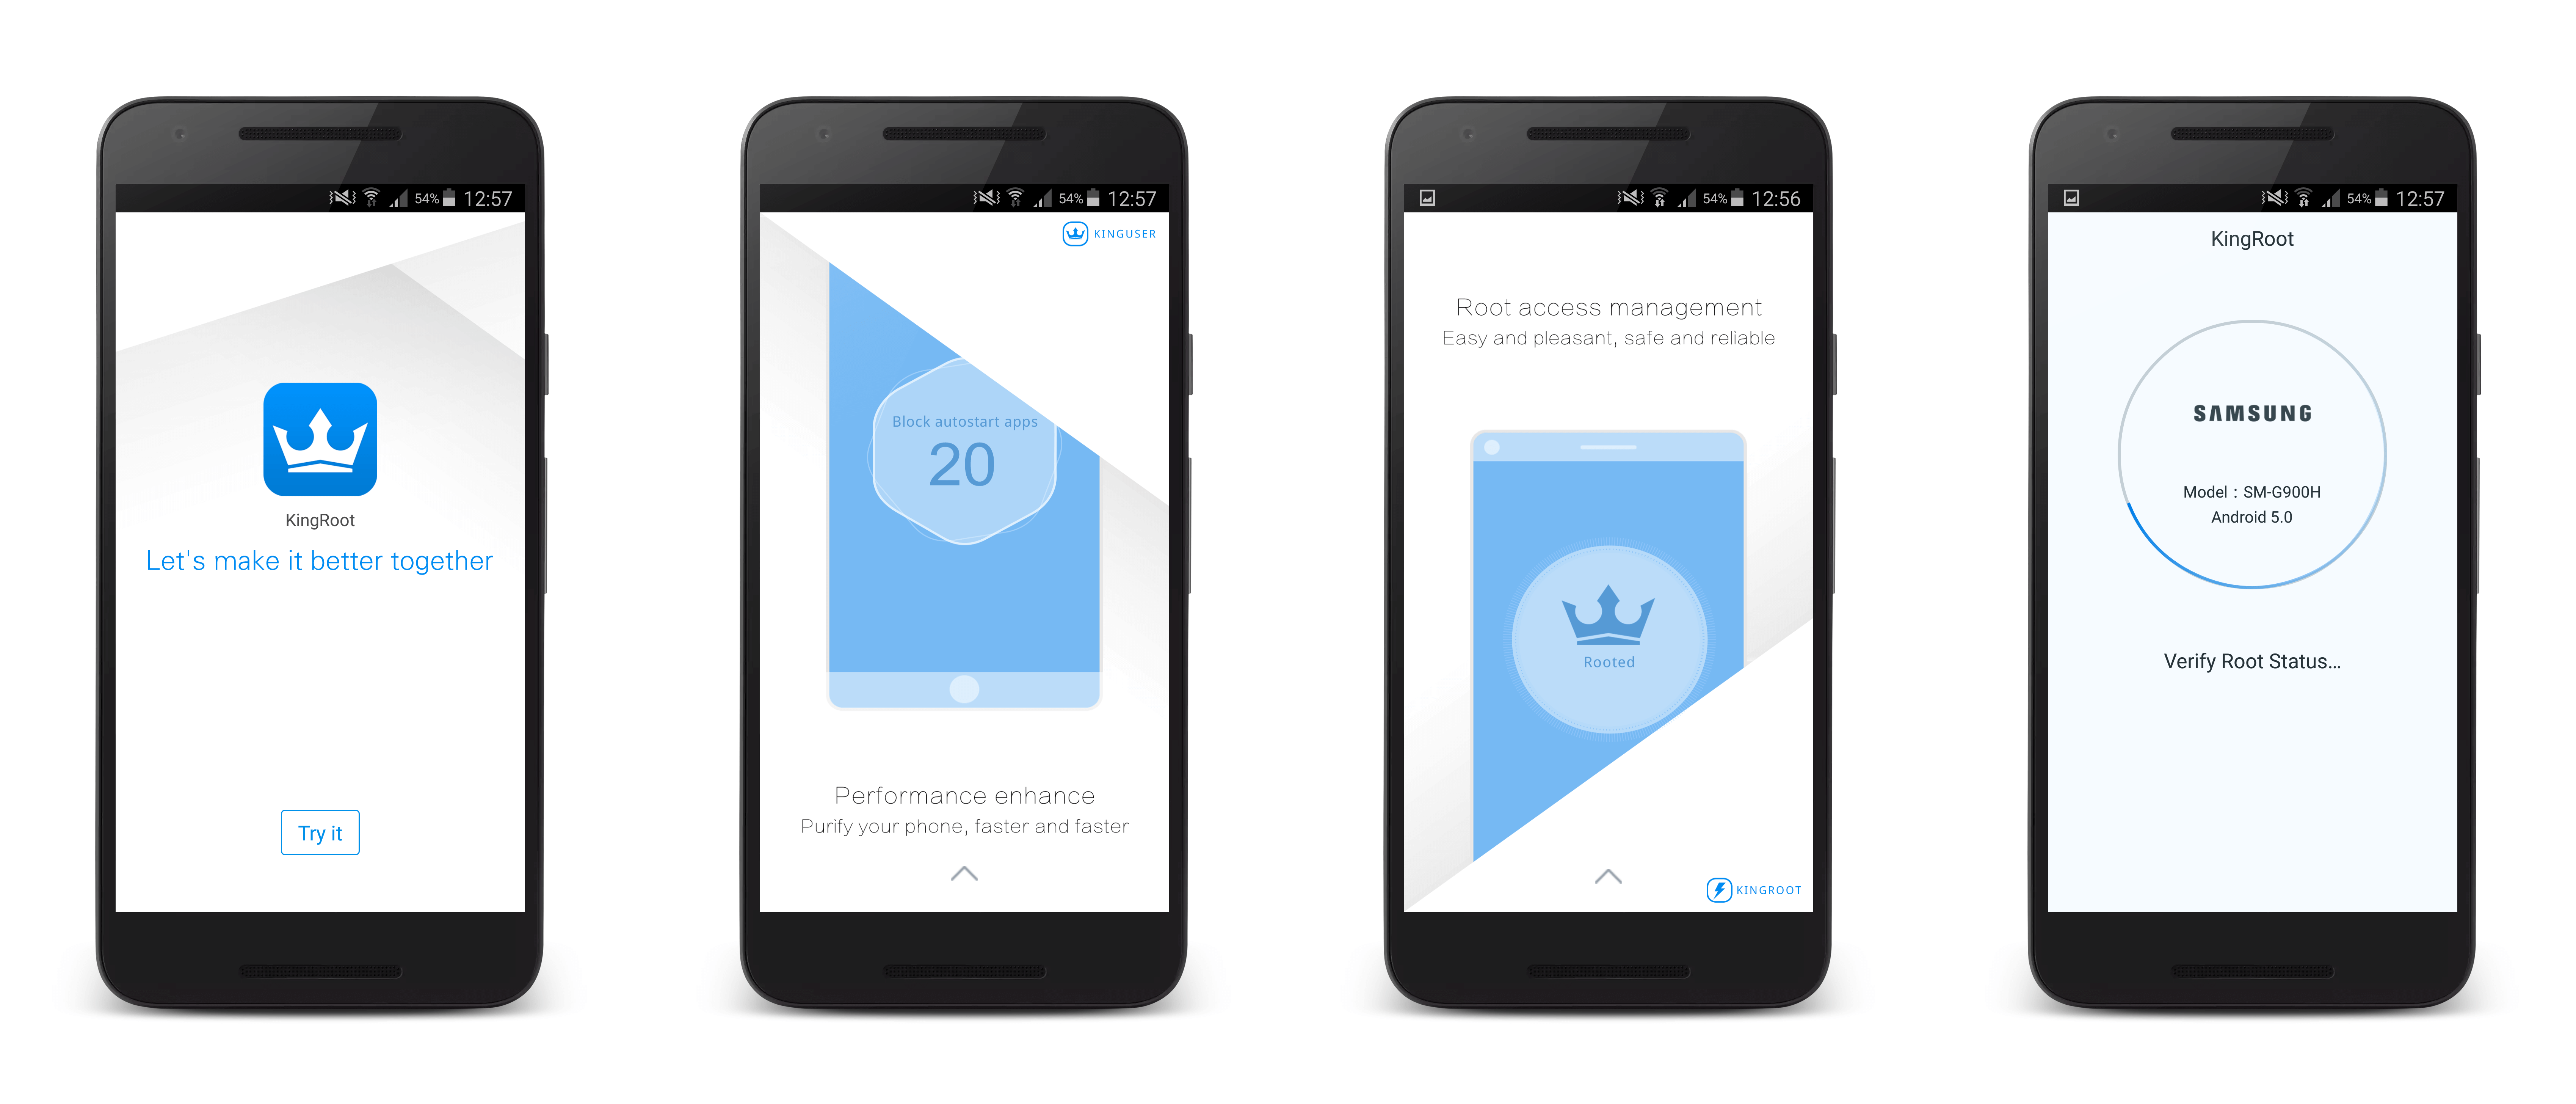 KingRoot Androtrends App Mockup Root your android one click